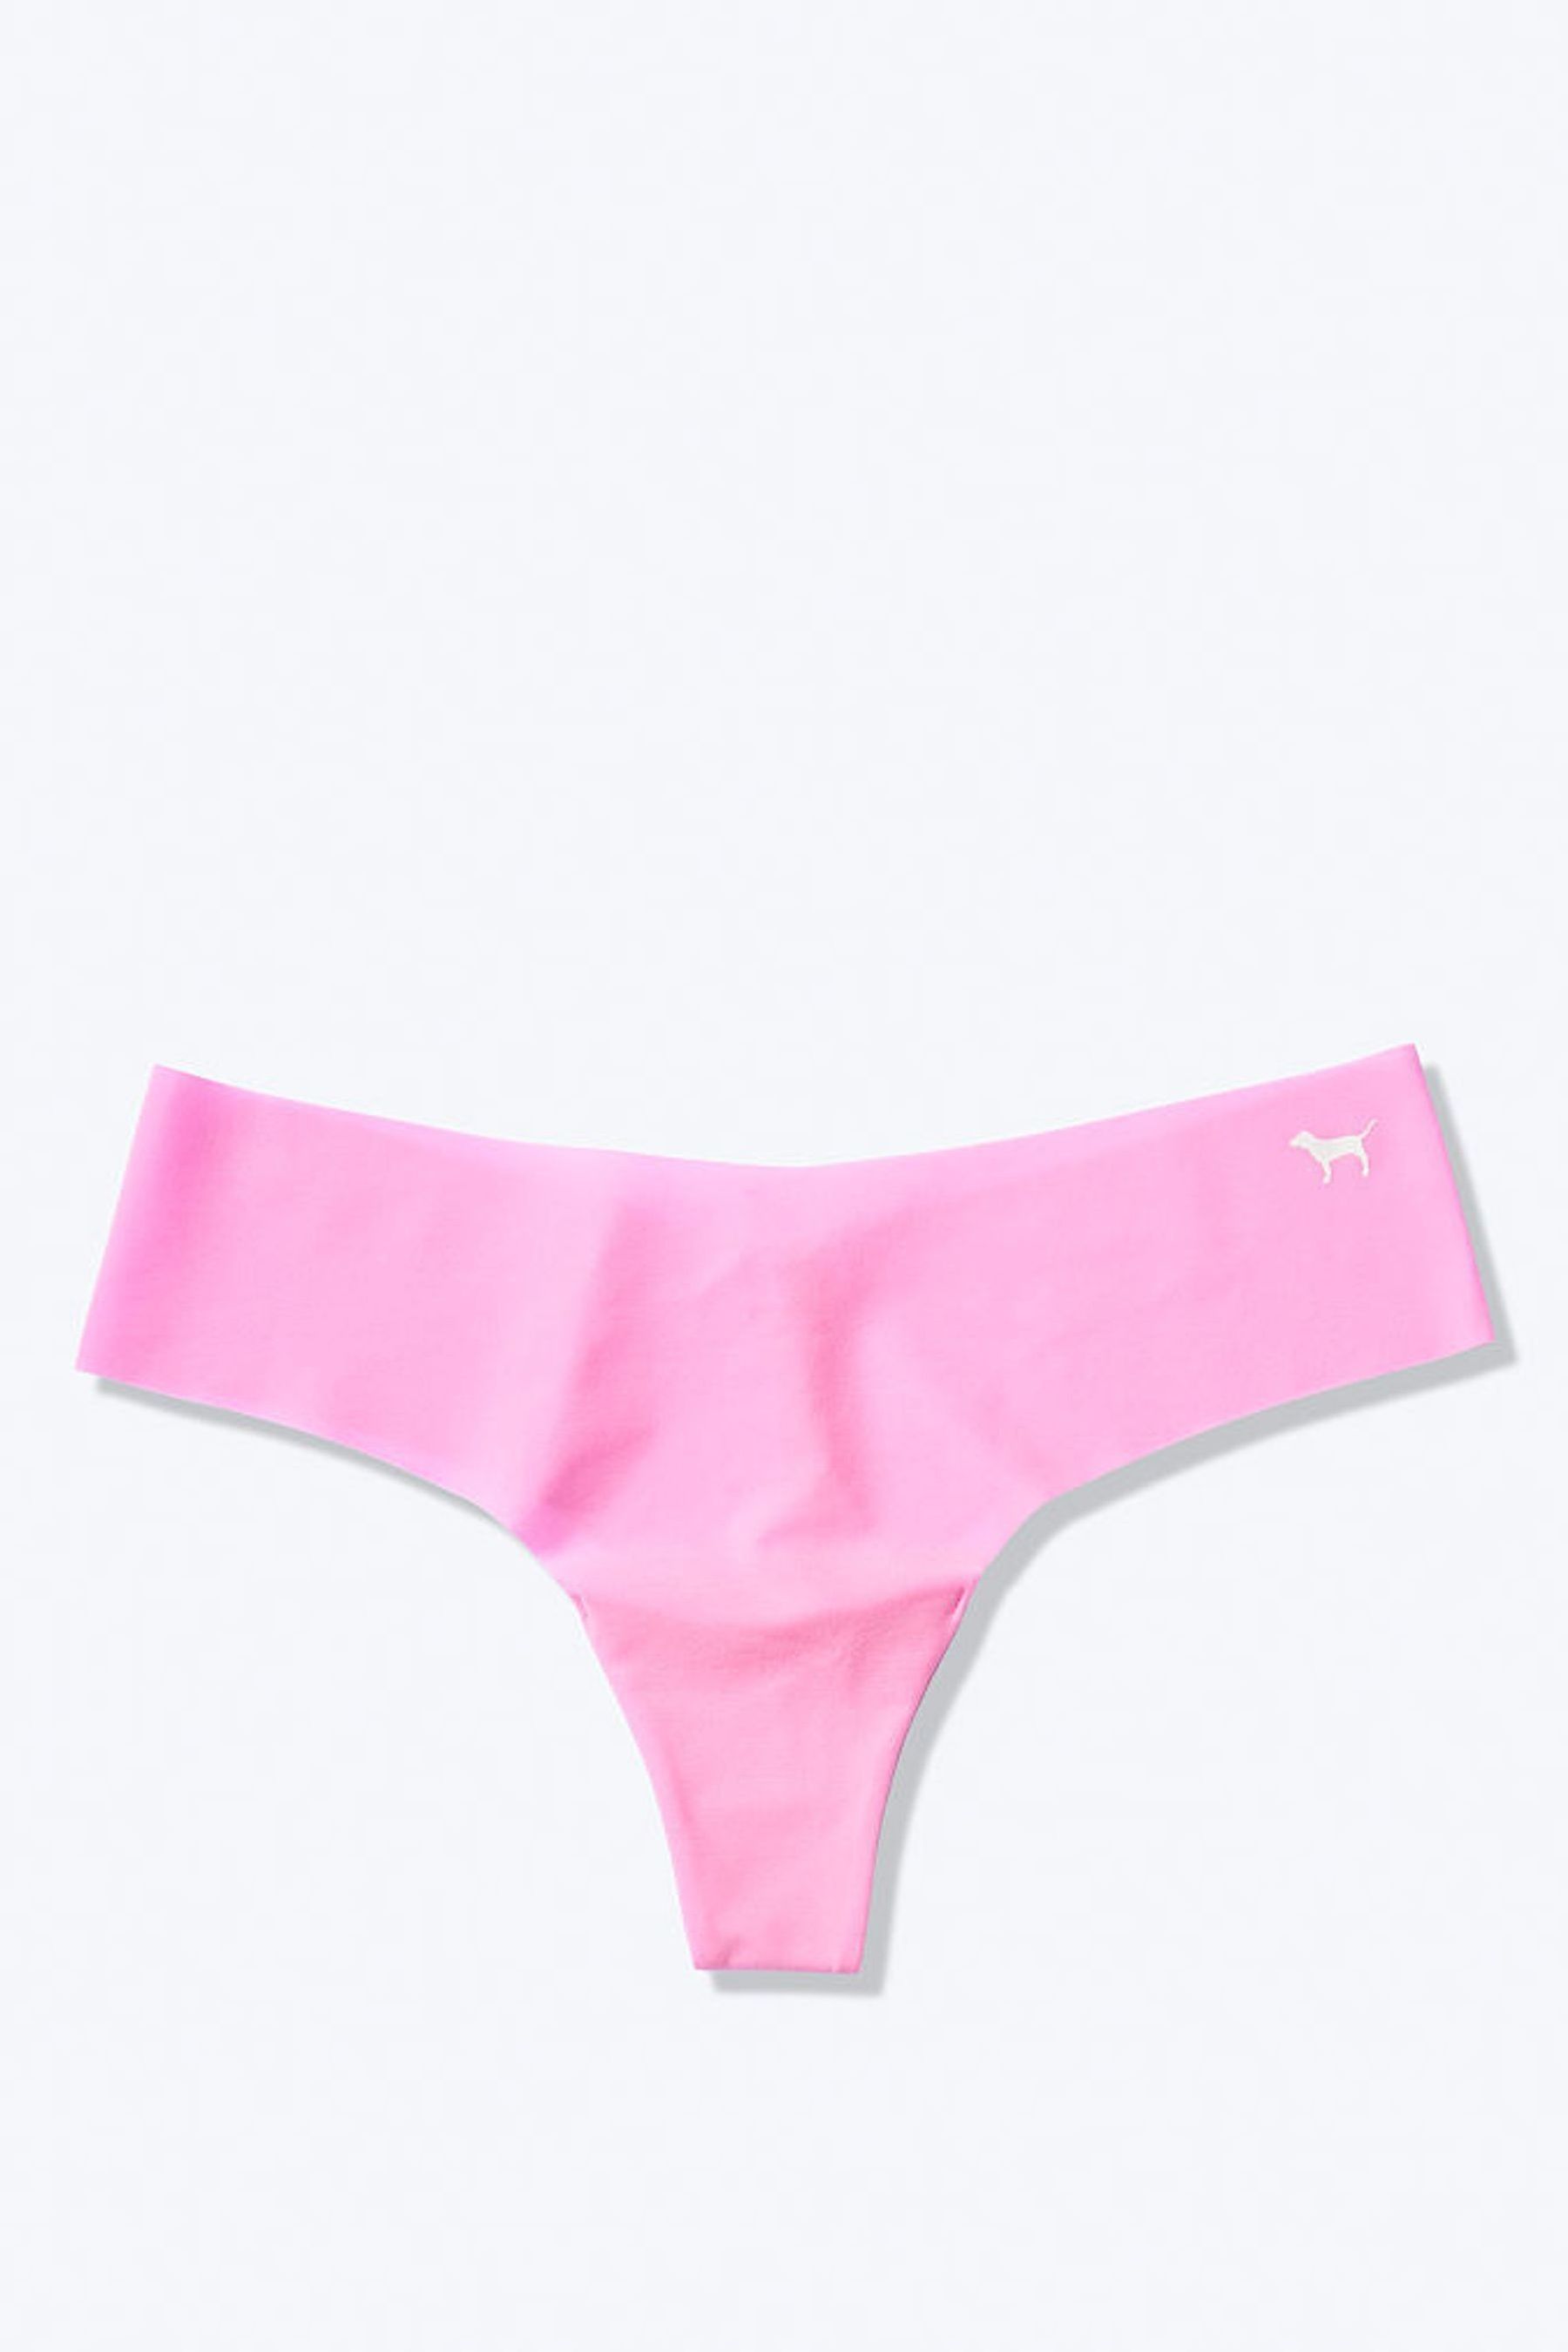 Buy Victoria's Secret PINK No Show Thong Knicker from the Victoria's ...